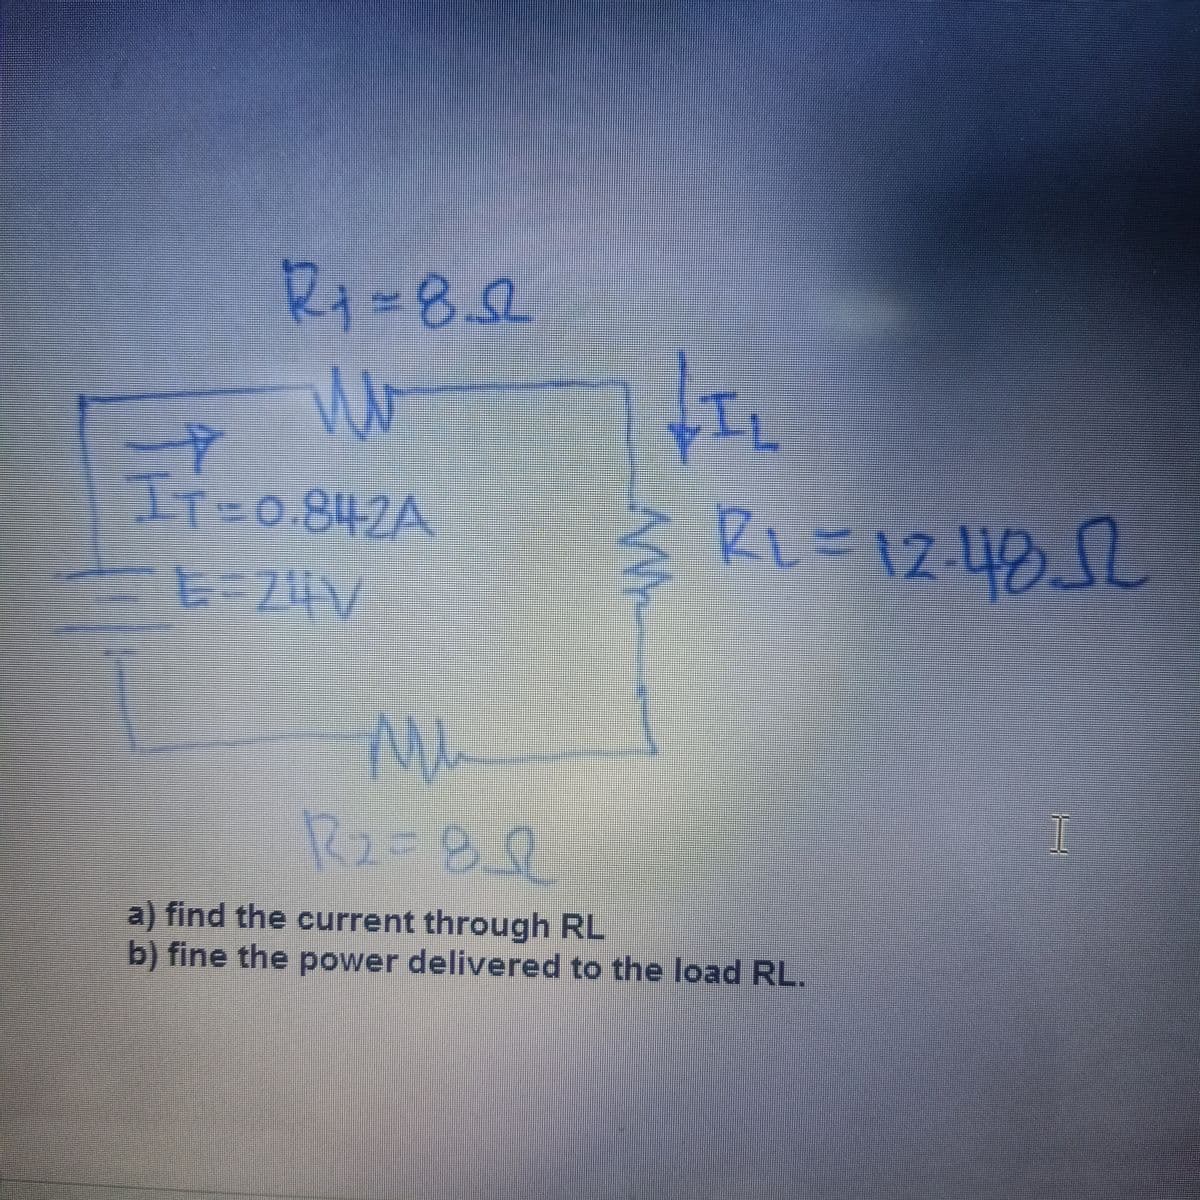 R+=822
W
IT=0.842A
E
Mu
R2=80
1₂
RL=12-485
a) find the current through RL
b) fine the power delivered to the load RL.